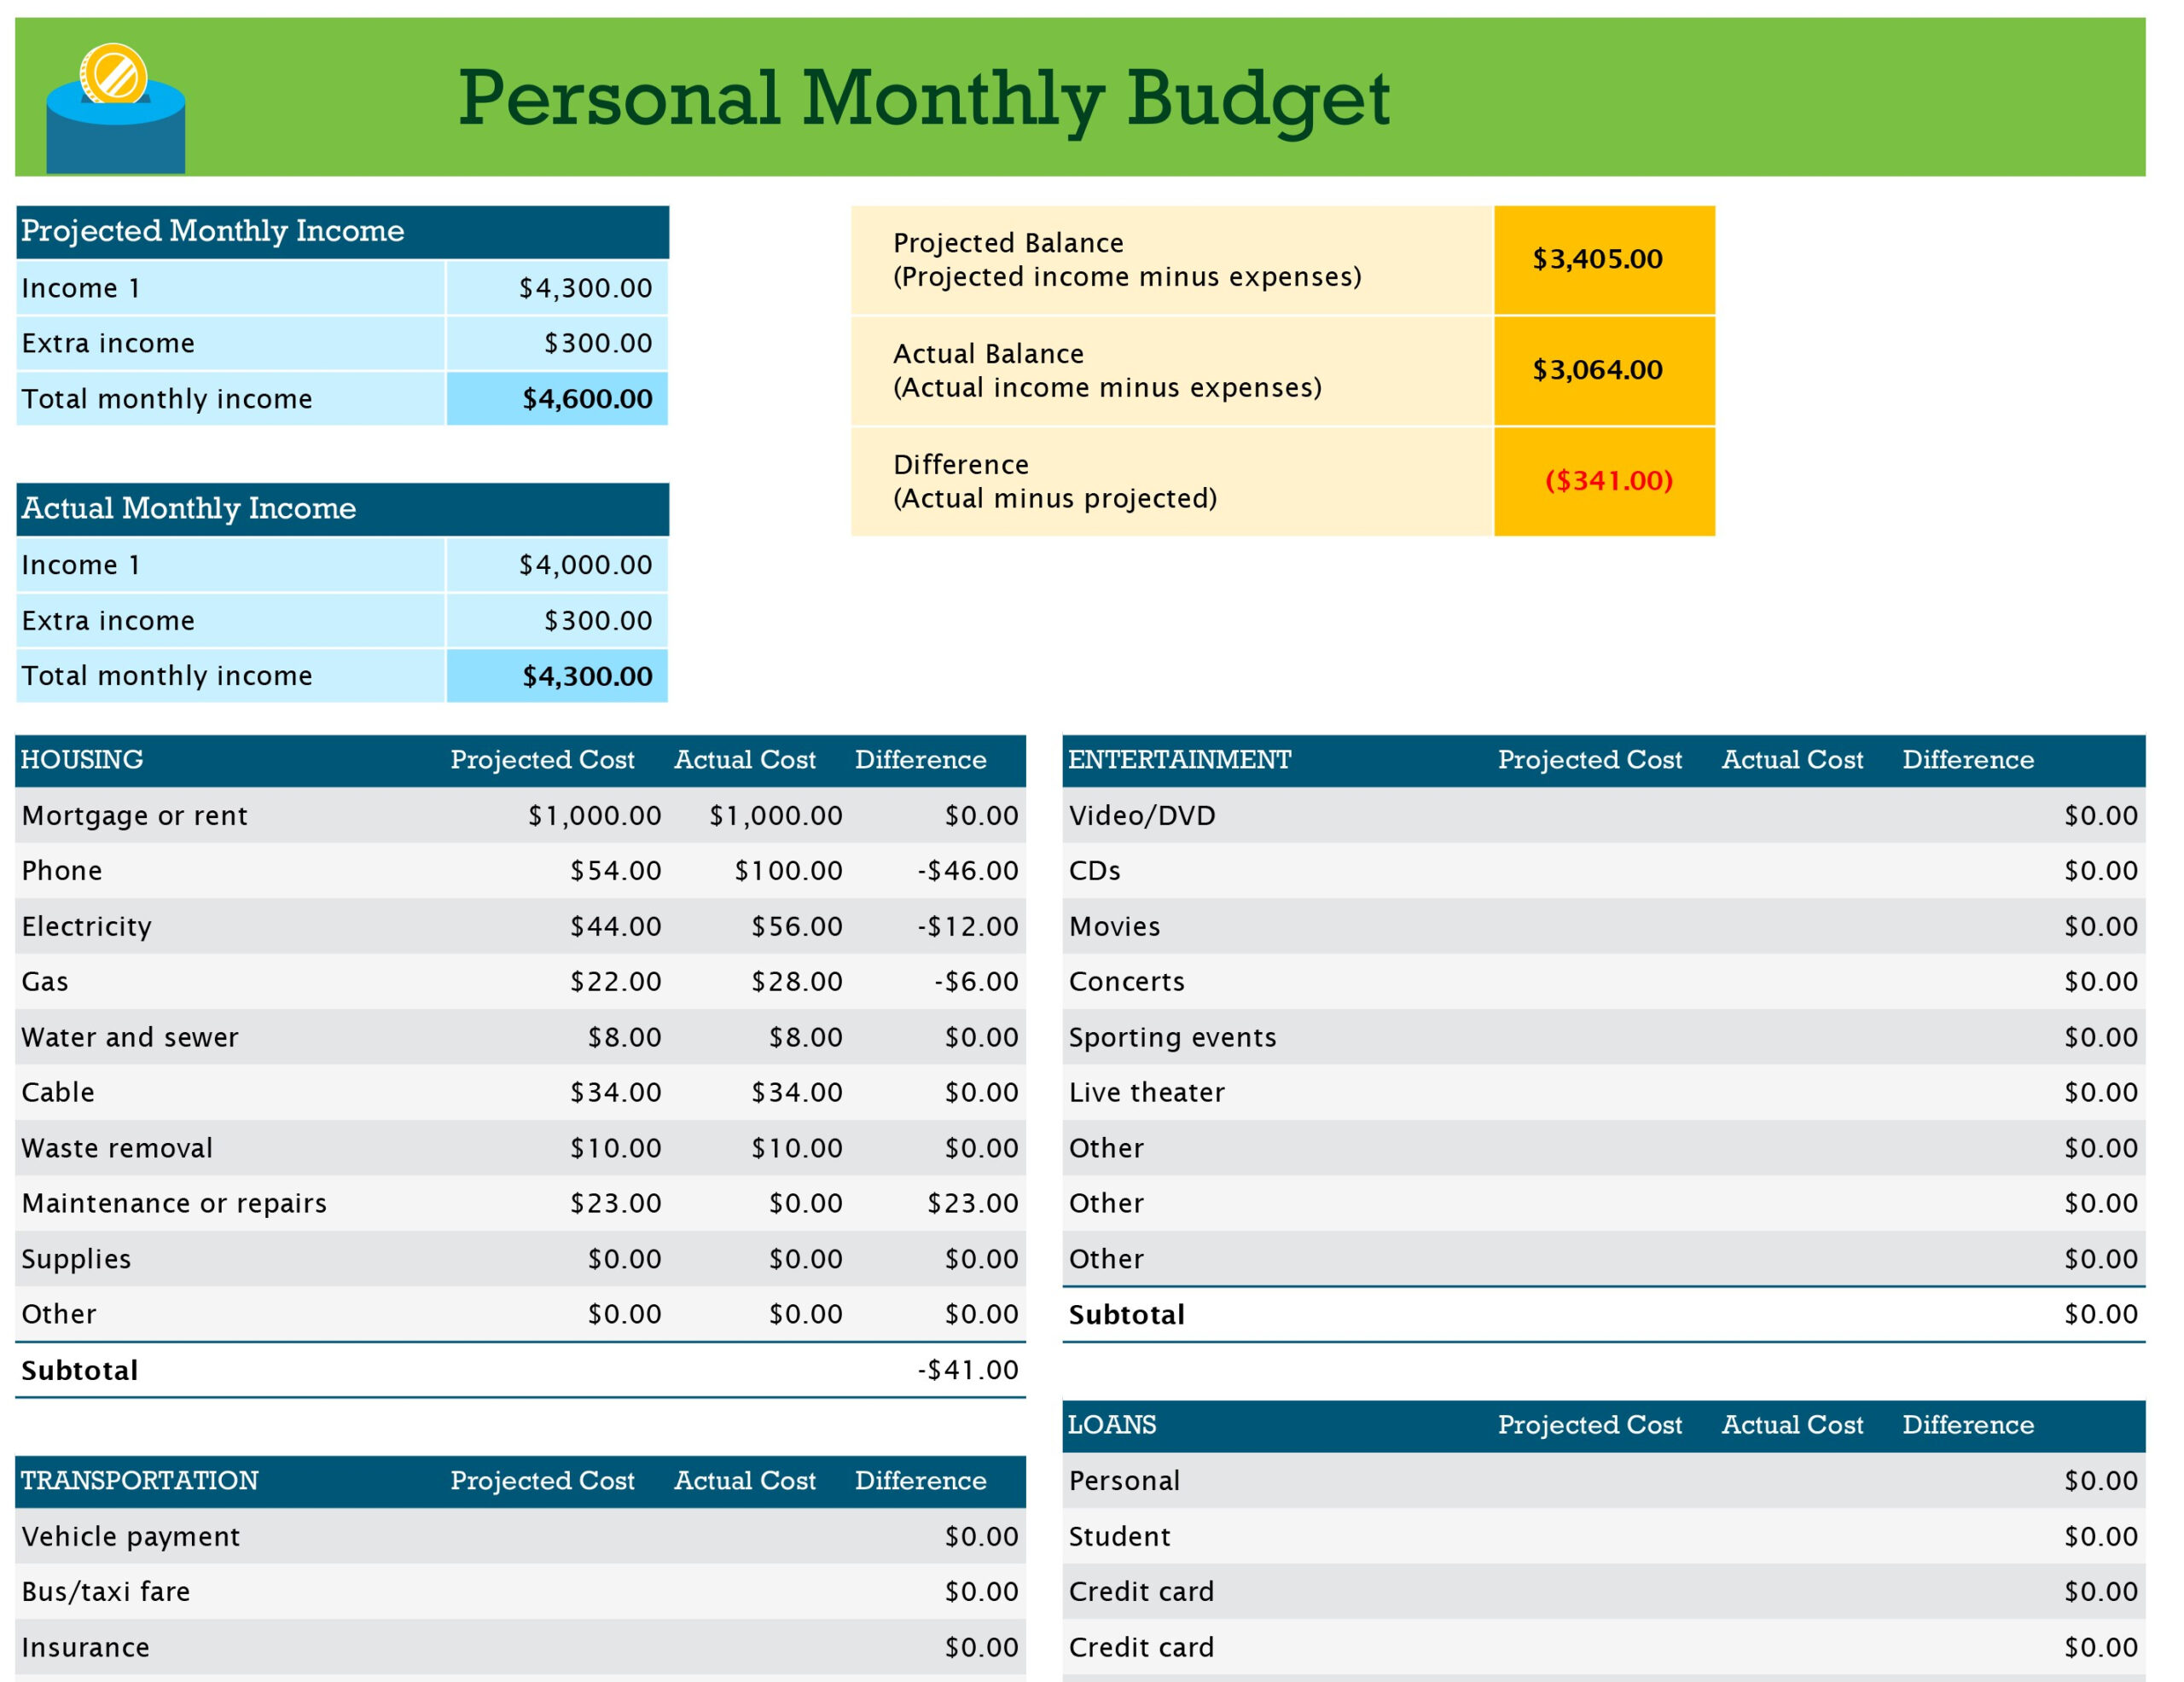 Monthly Budget Template Excel  Template Creator Pertaining To Basic Personal Budget Template Inside Basic Personal Budget Template